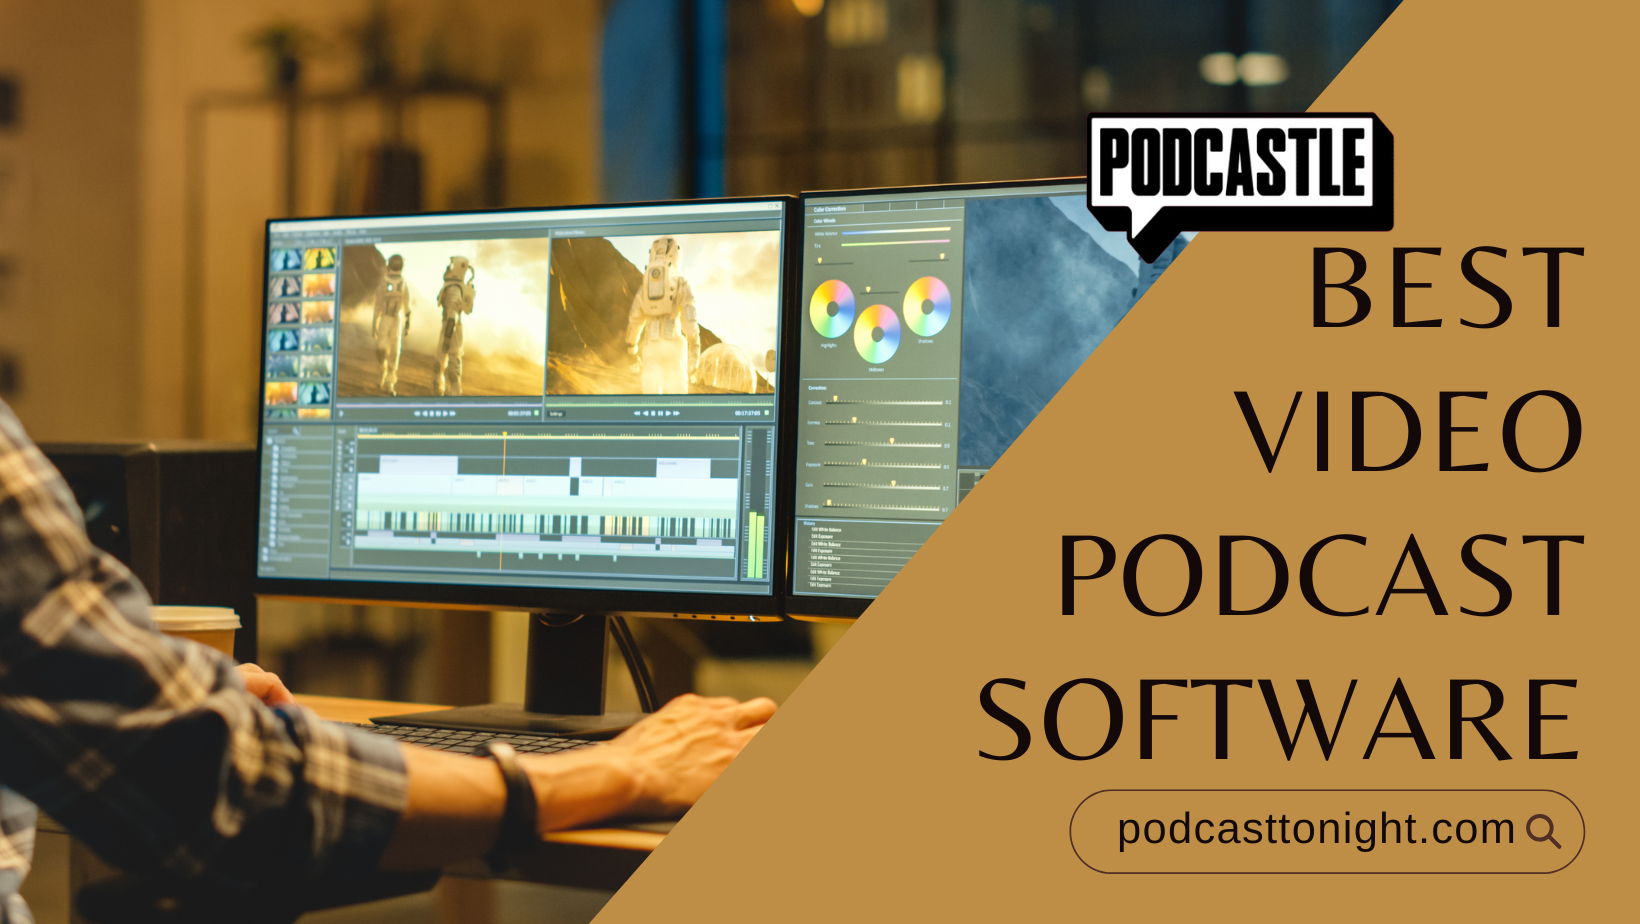 podcastle Video podcast software